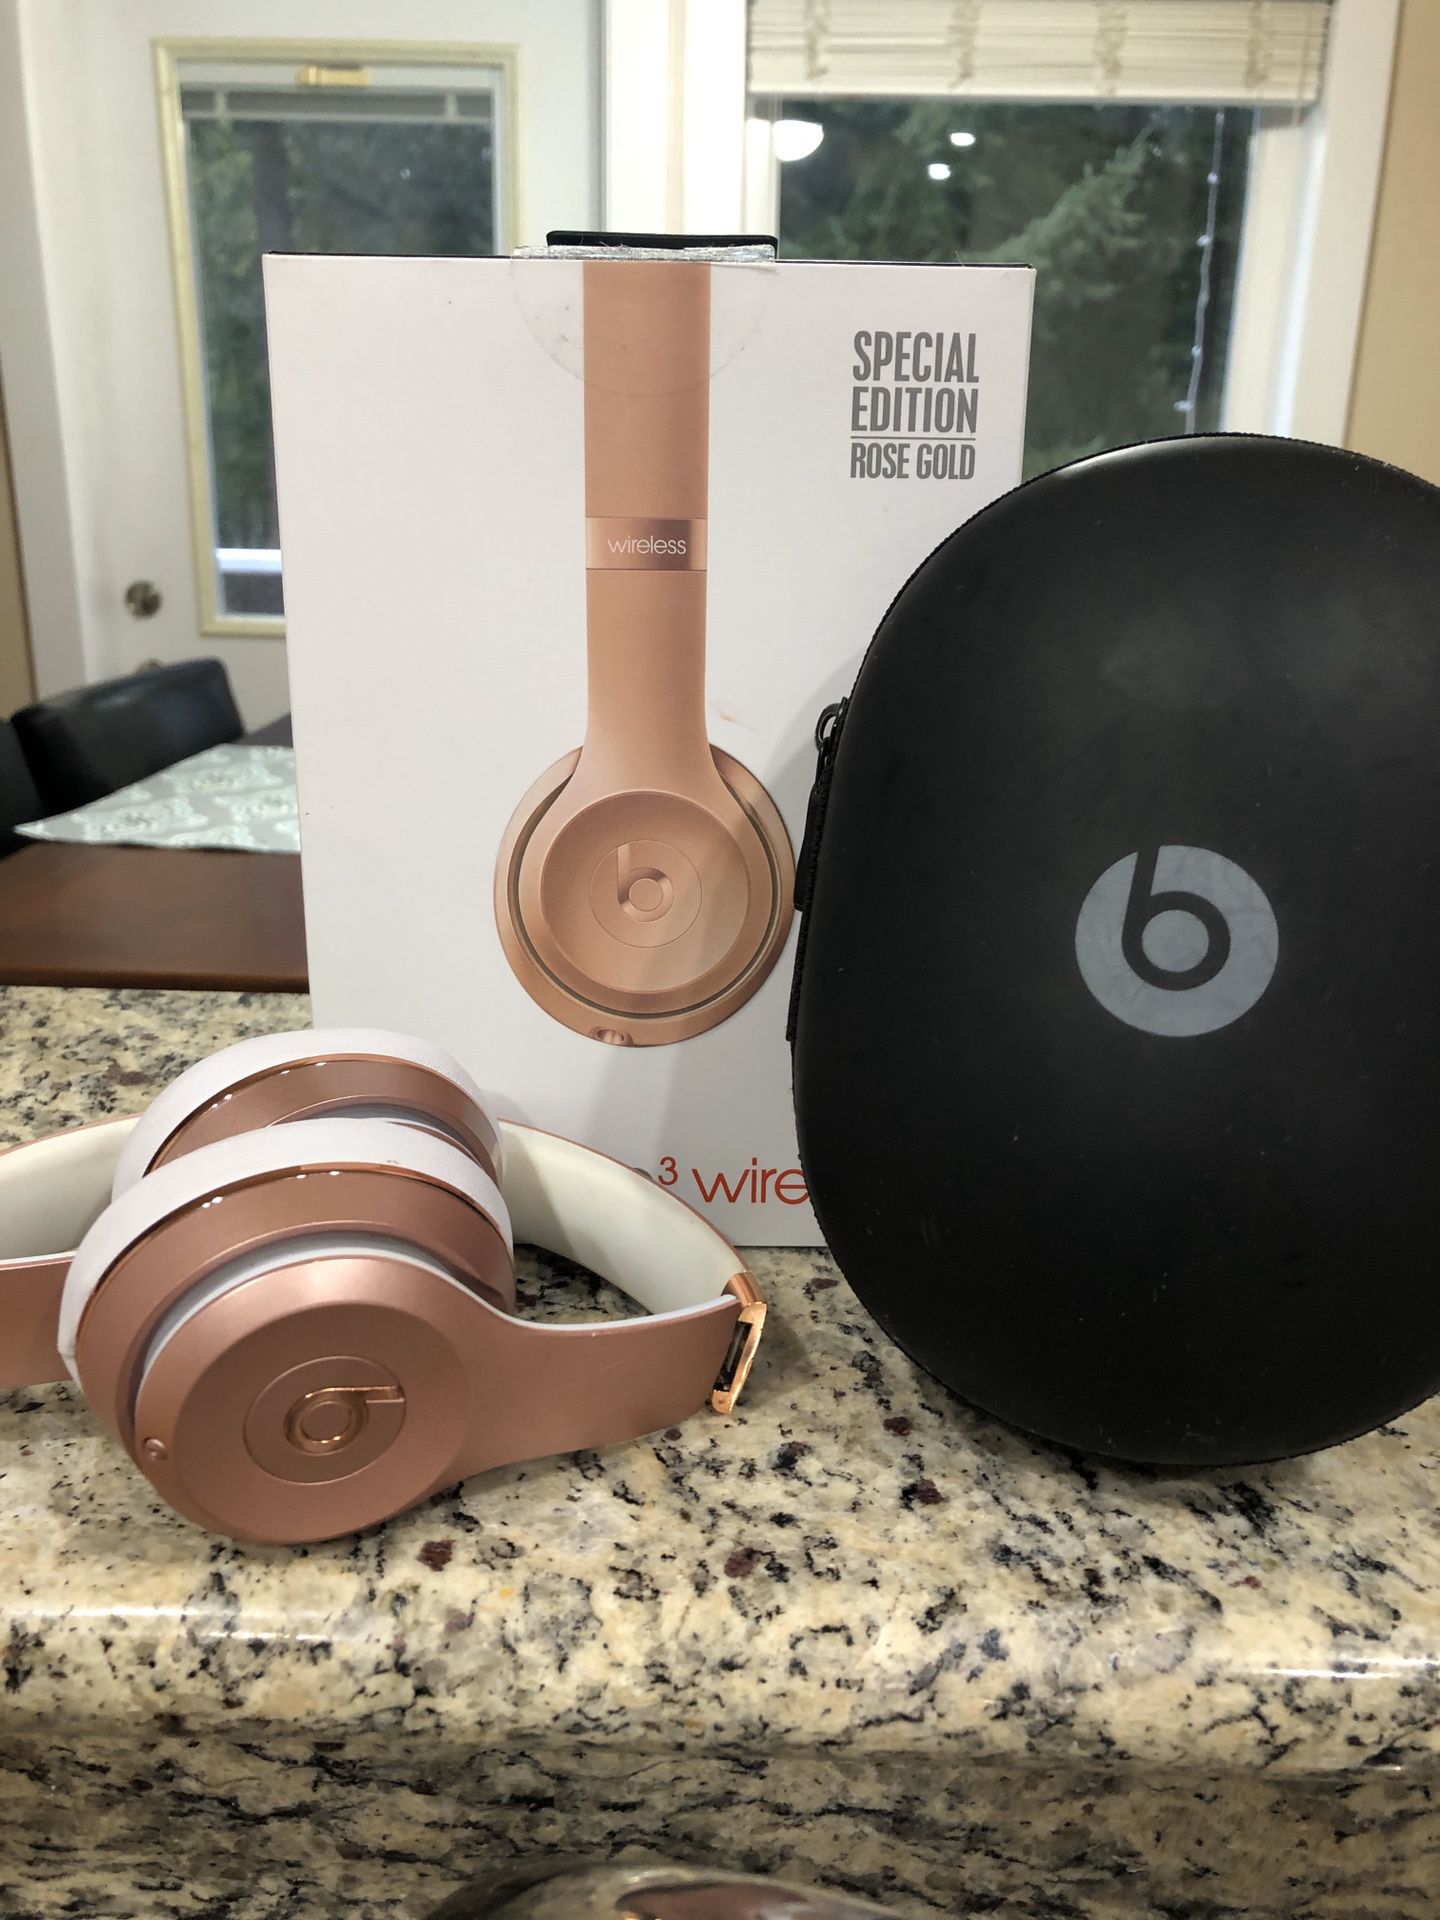 Special Edition Rose Gold Beats Wireless